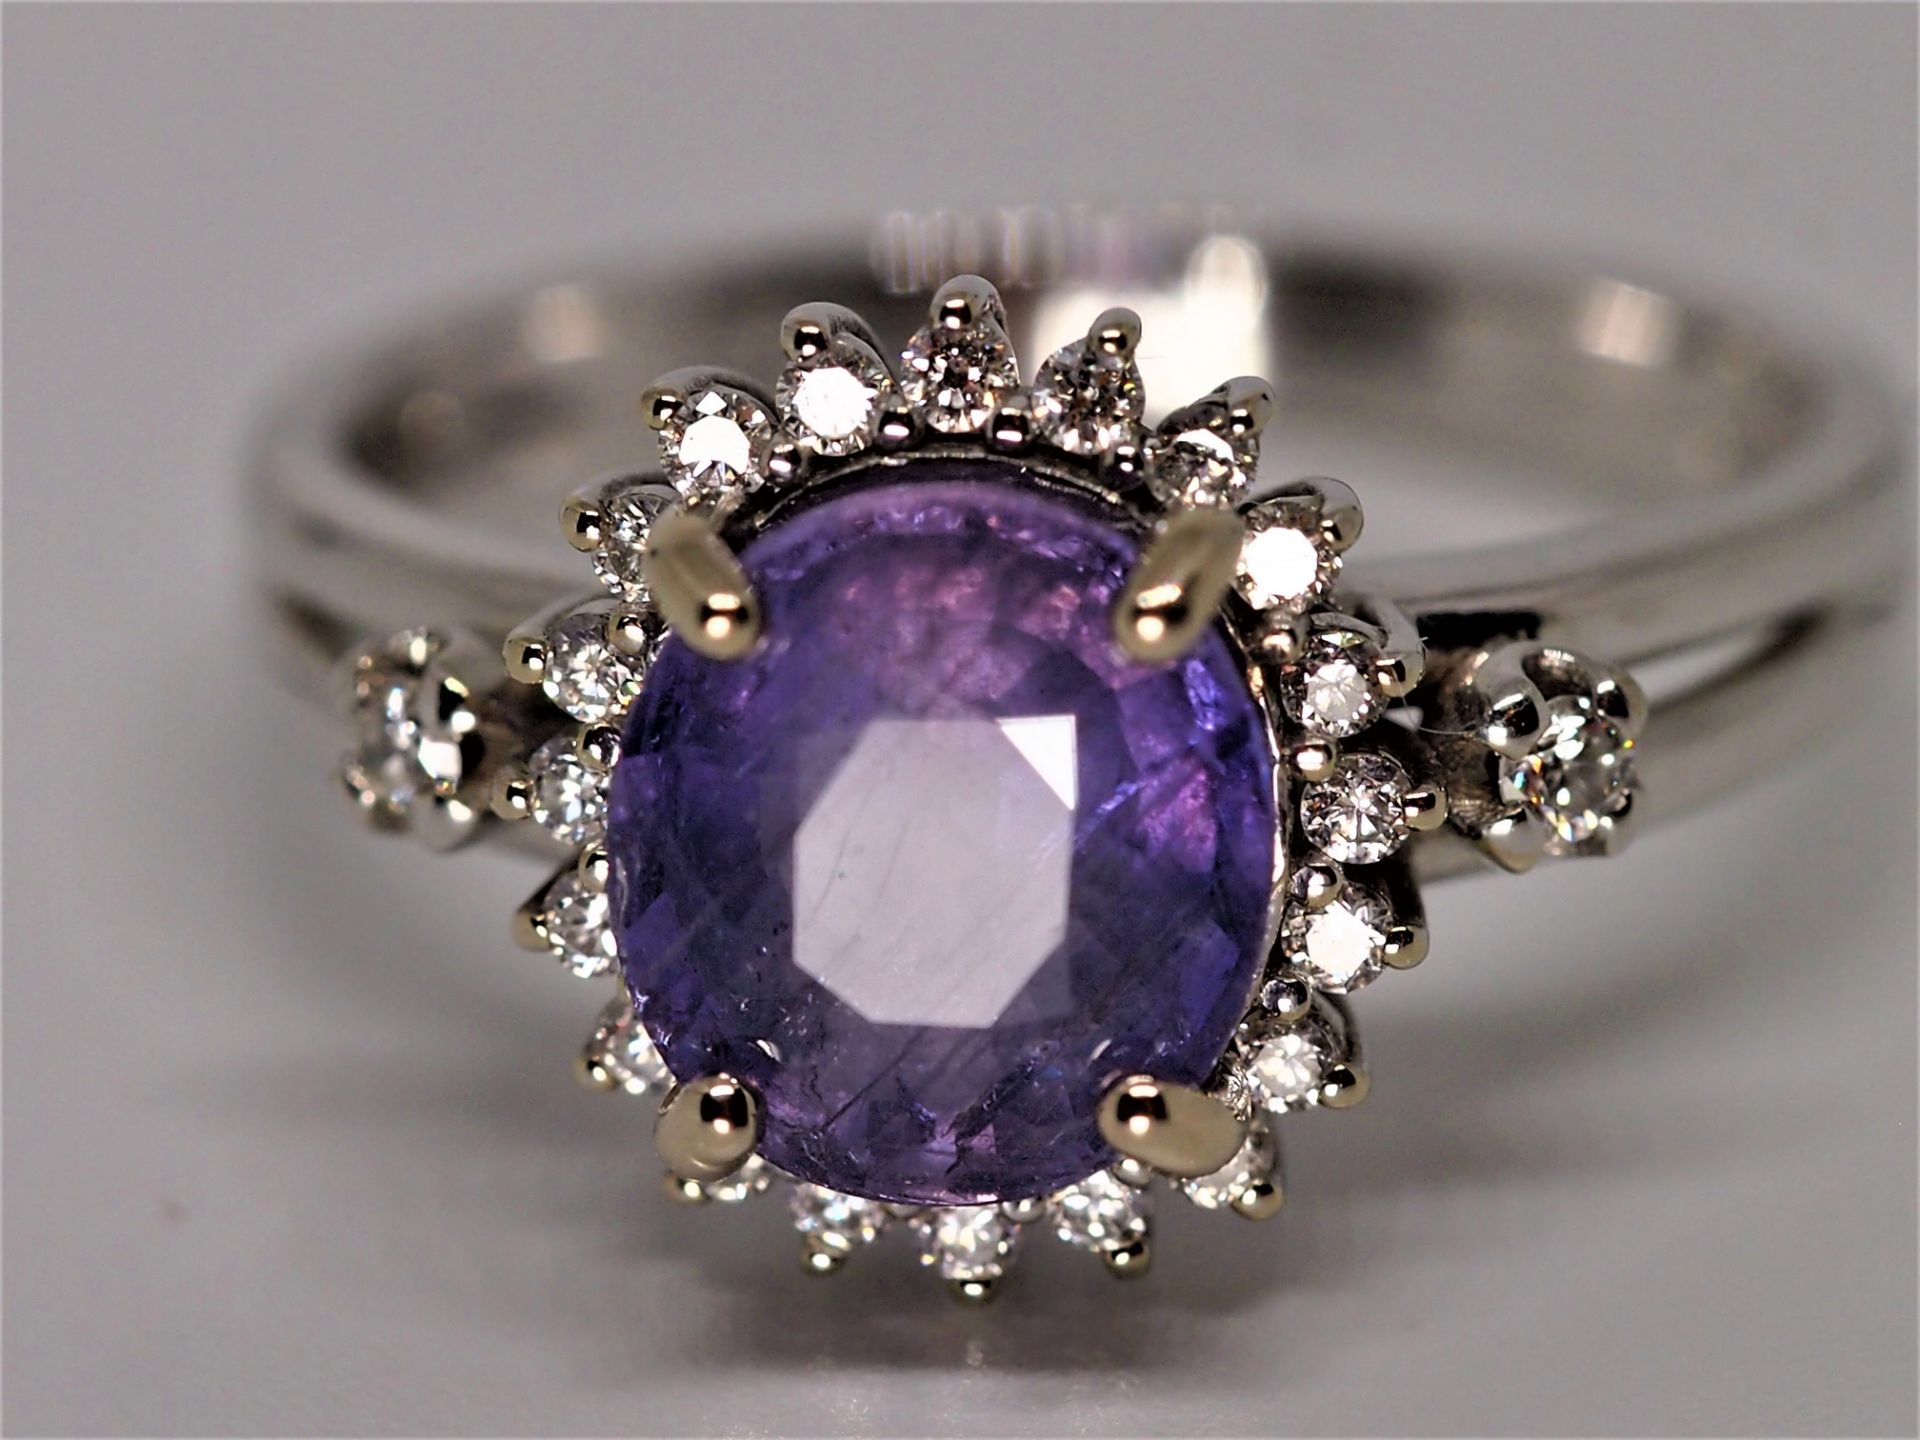 Certified 2.52 ct Untreated Colour Change Sapphire and Diamonds 18K Gold Ring - Image 5 of 8